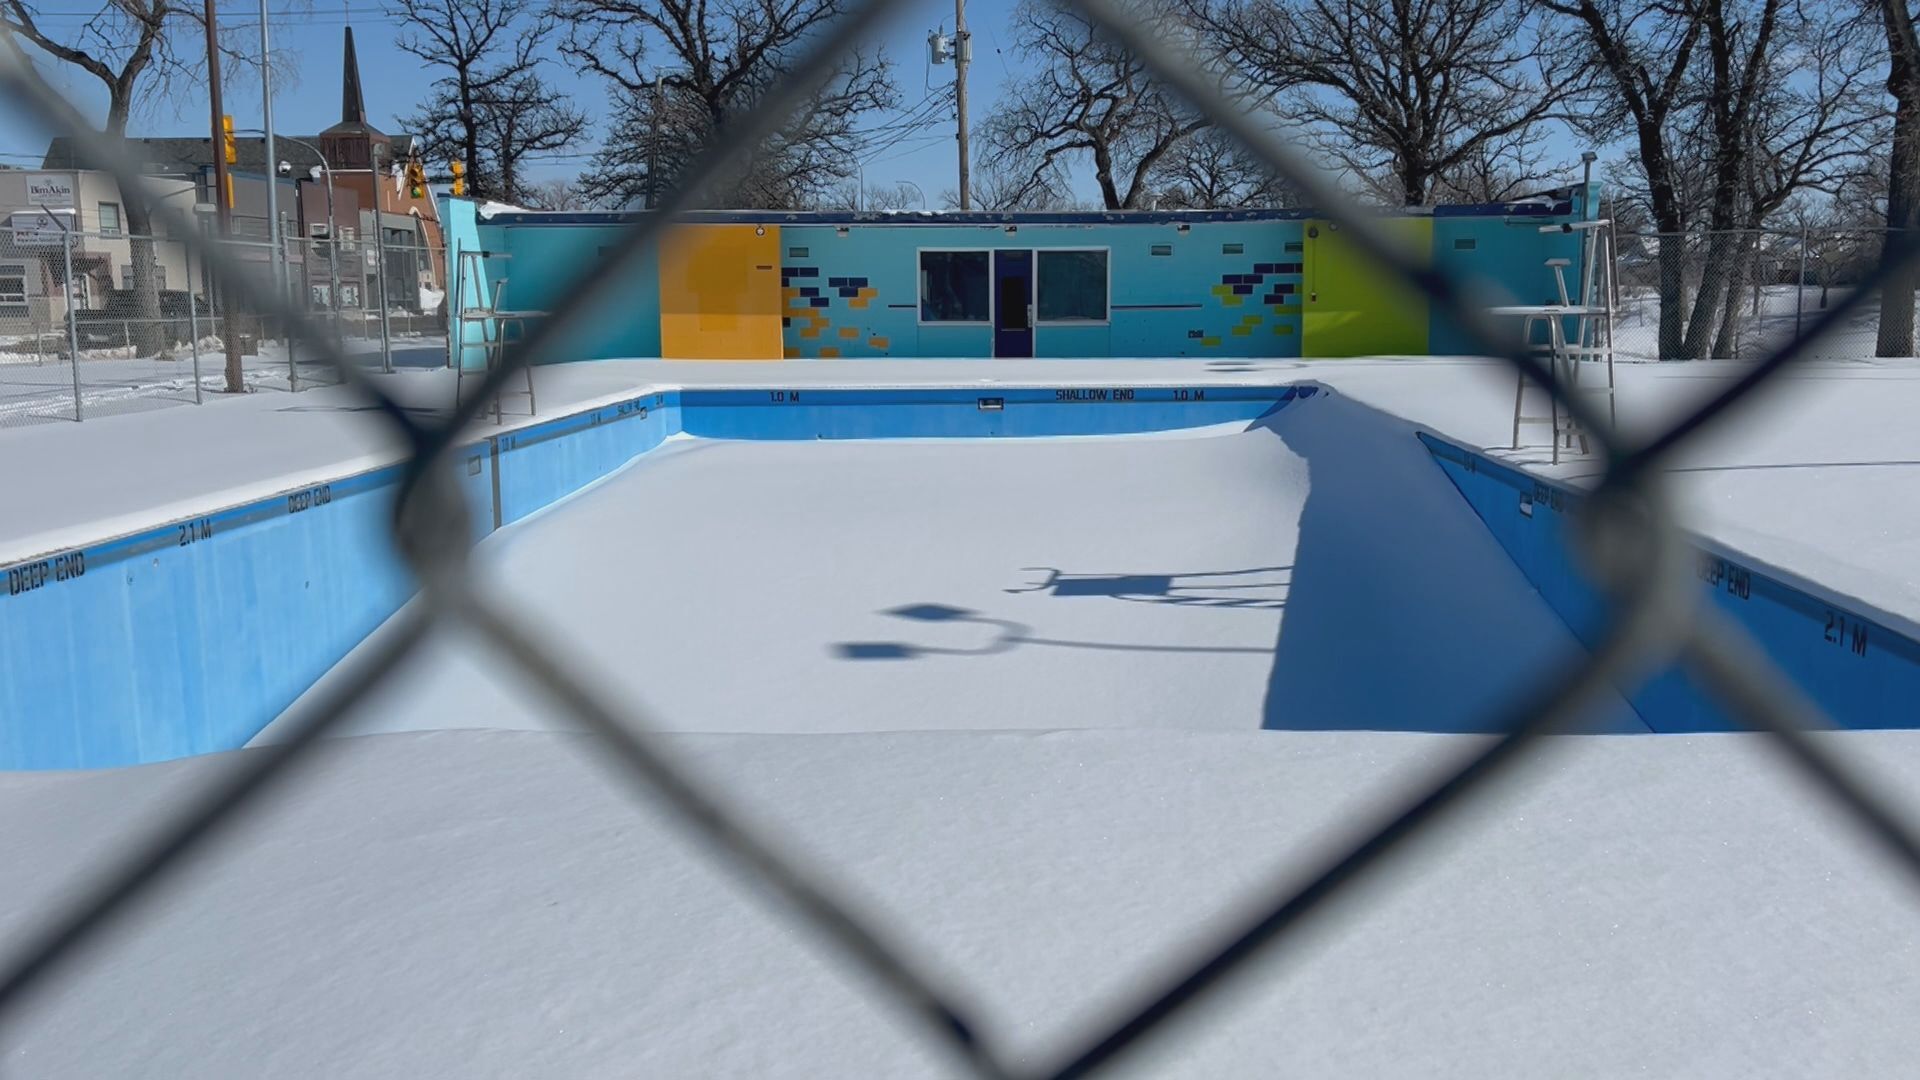 Saint Boniface residents take matters into their own hands to save Happy Land Pool